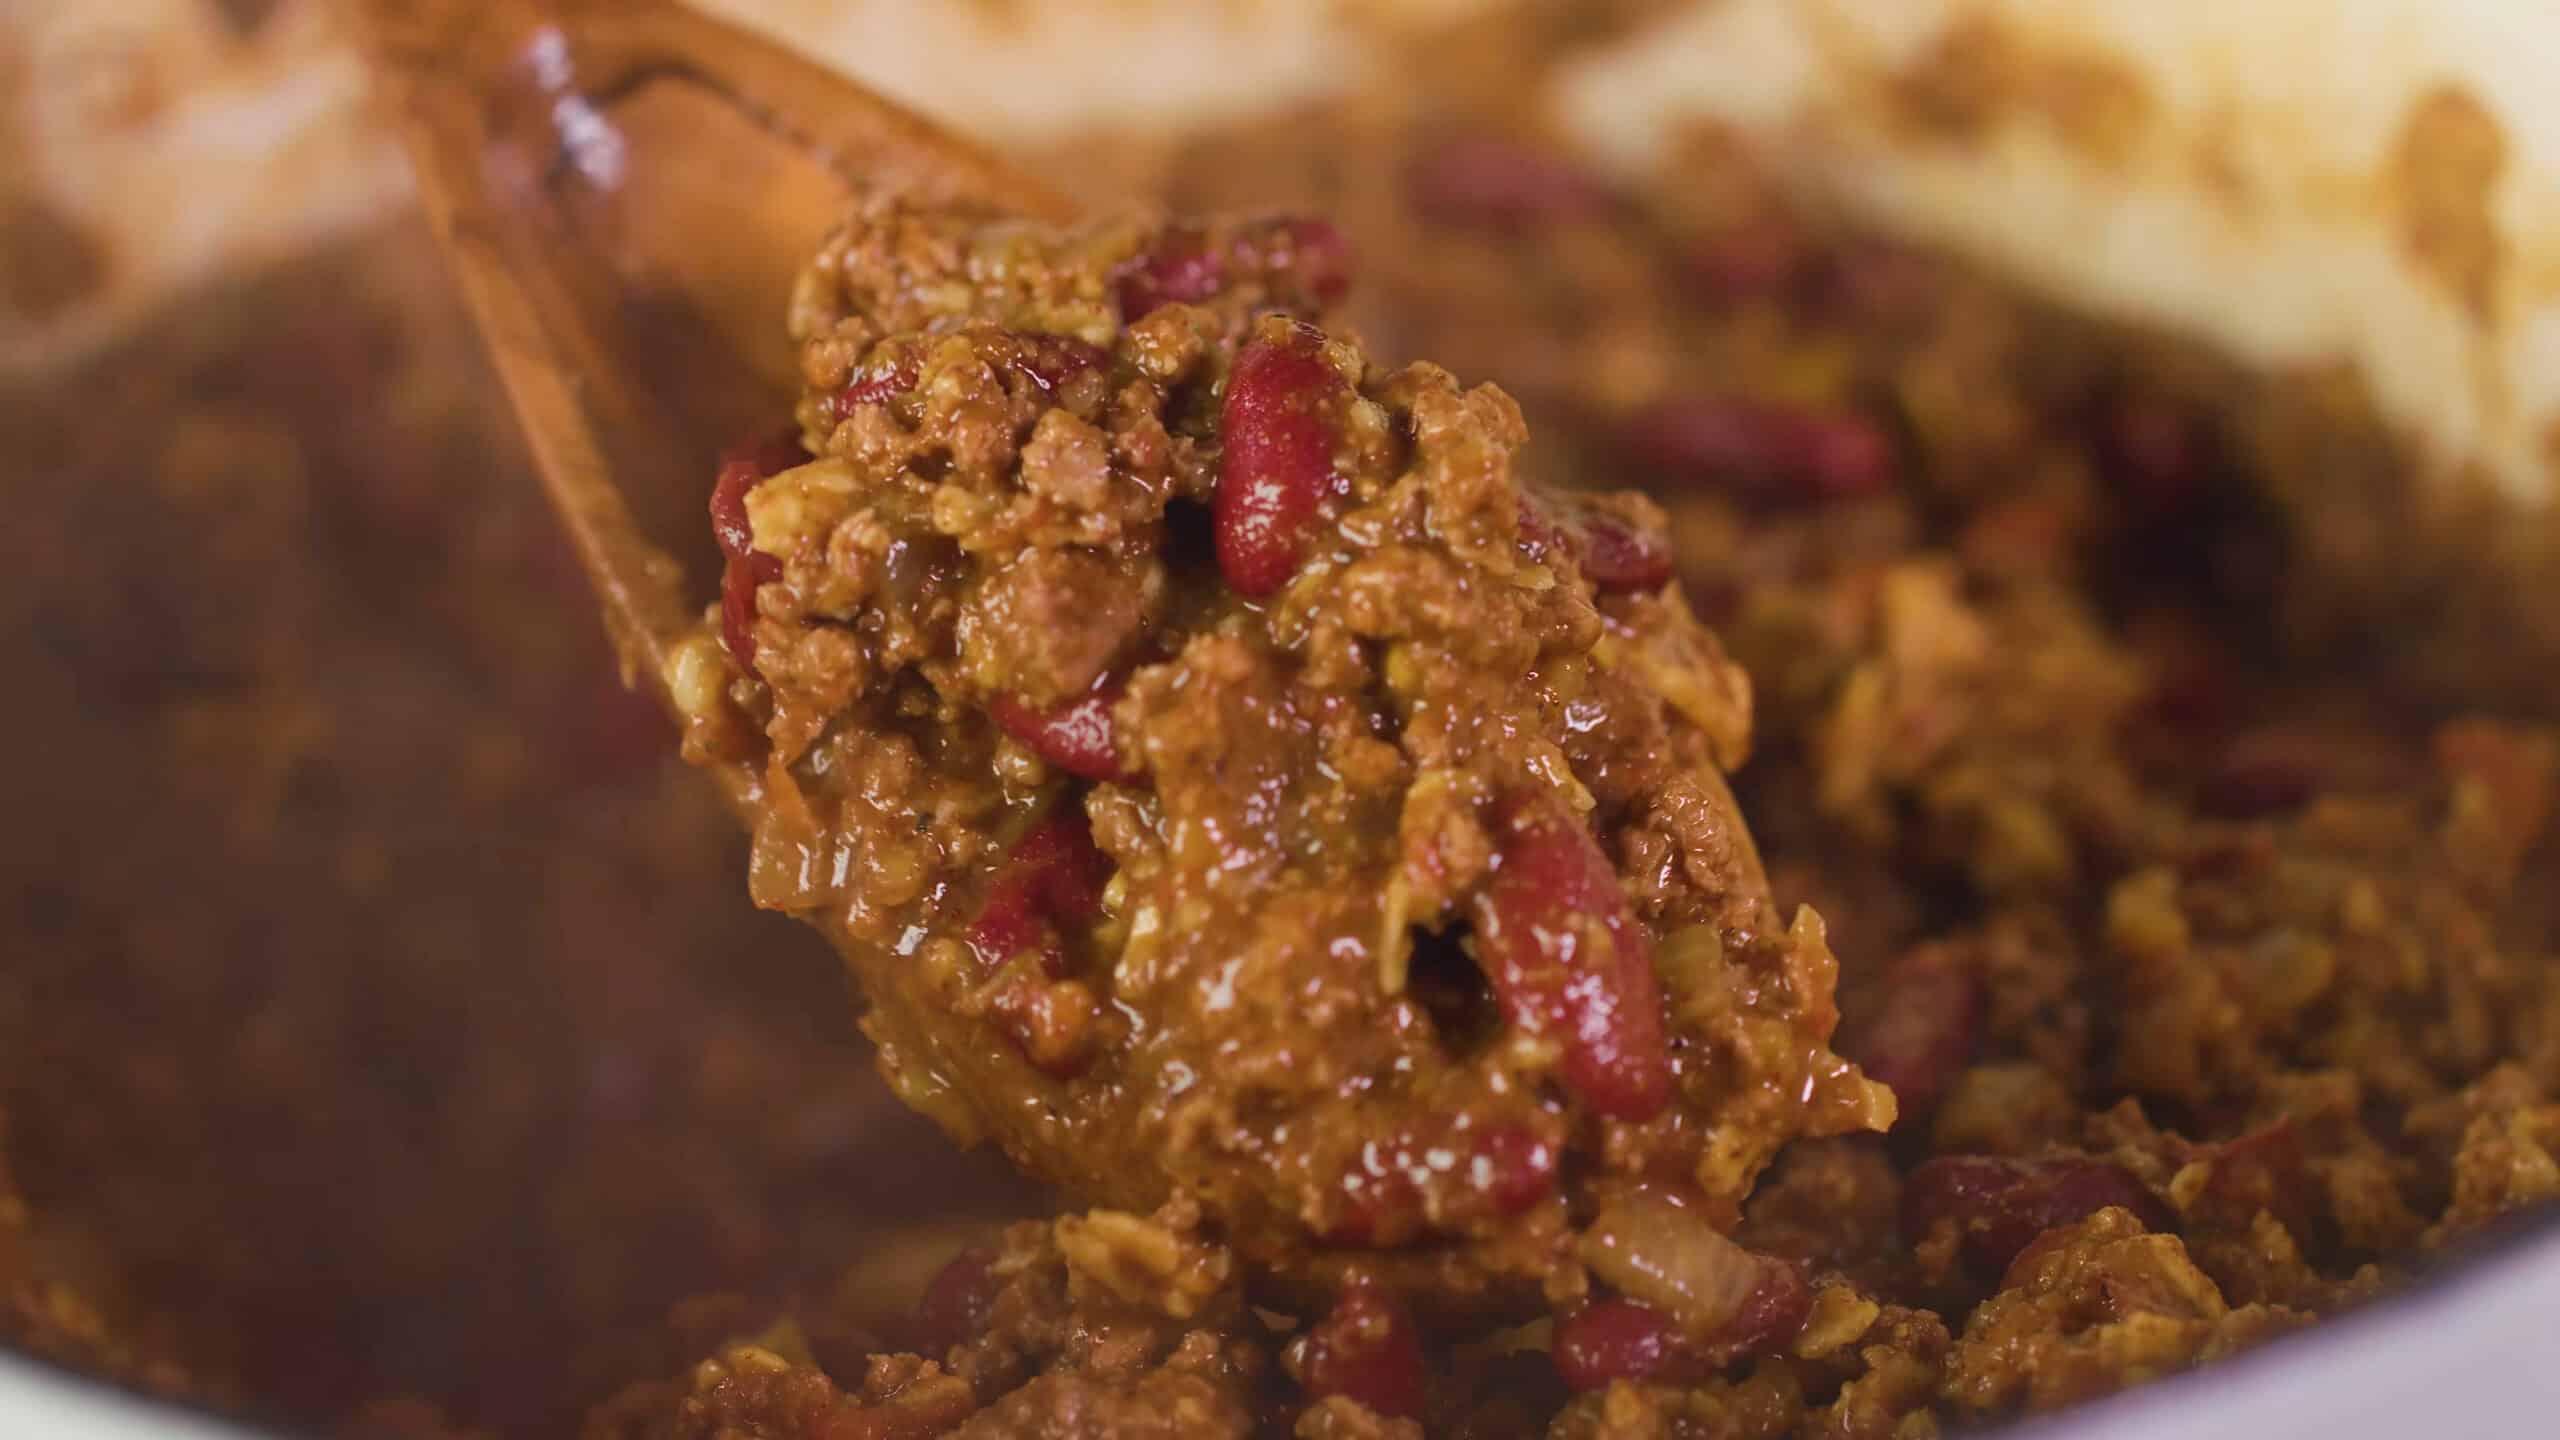 Close-up view of a large scoop of delicious chili on a wooden spoon with the rest of the chili making up the background.